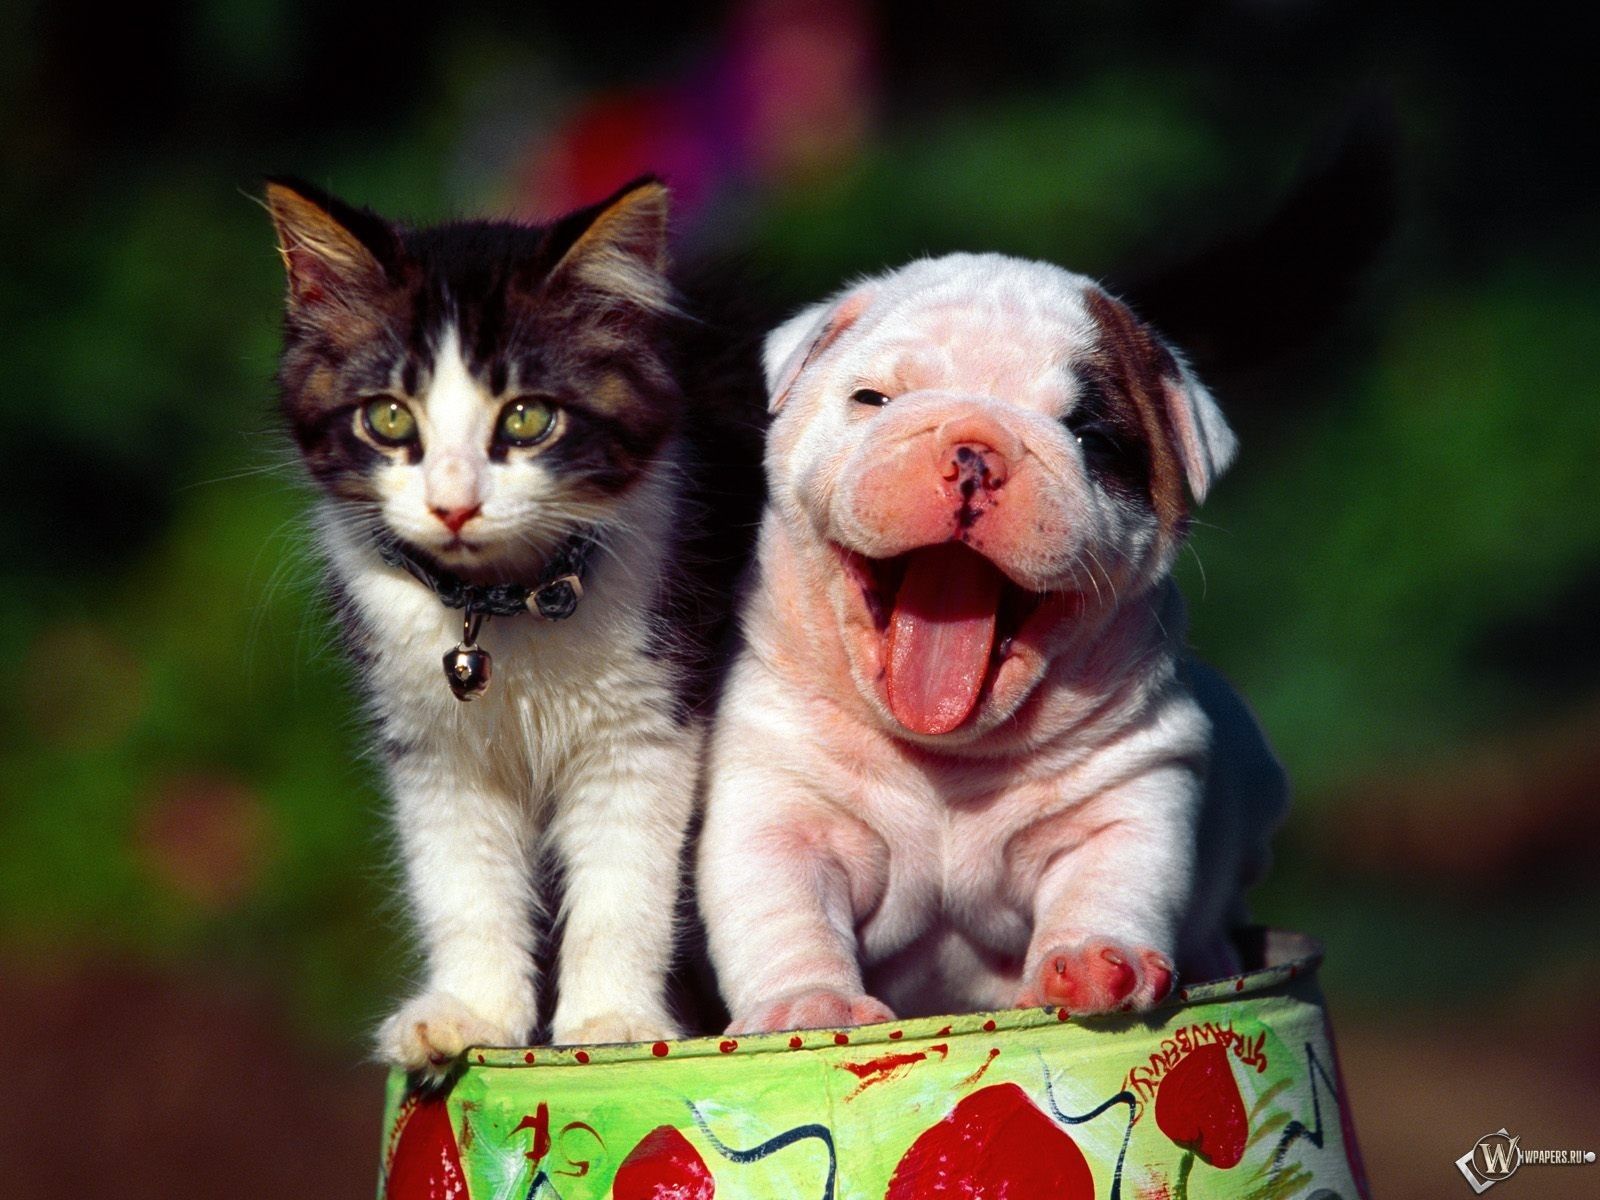 Puppy shar pei with kitty wallpaper and image, picture, photo